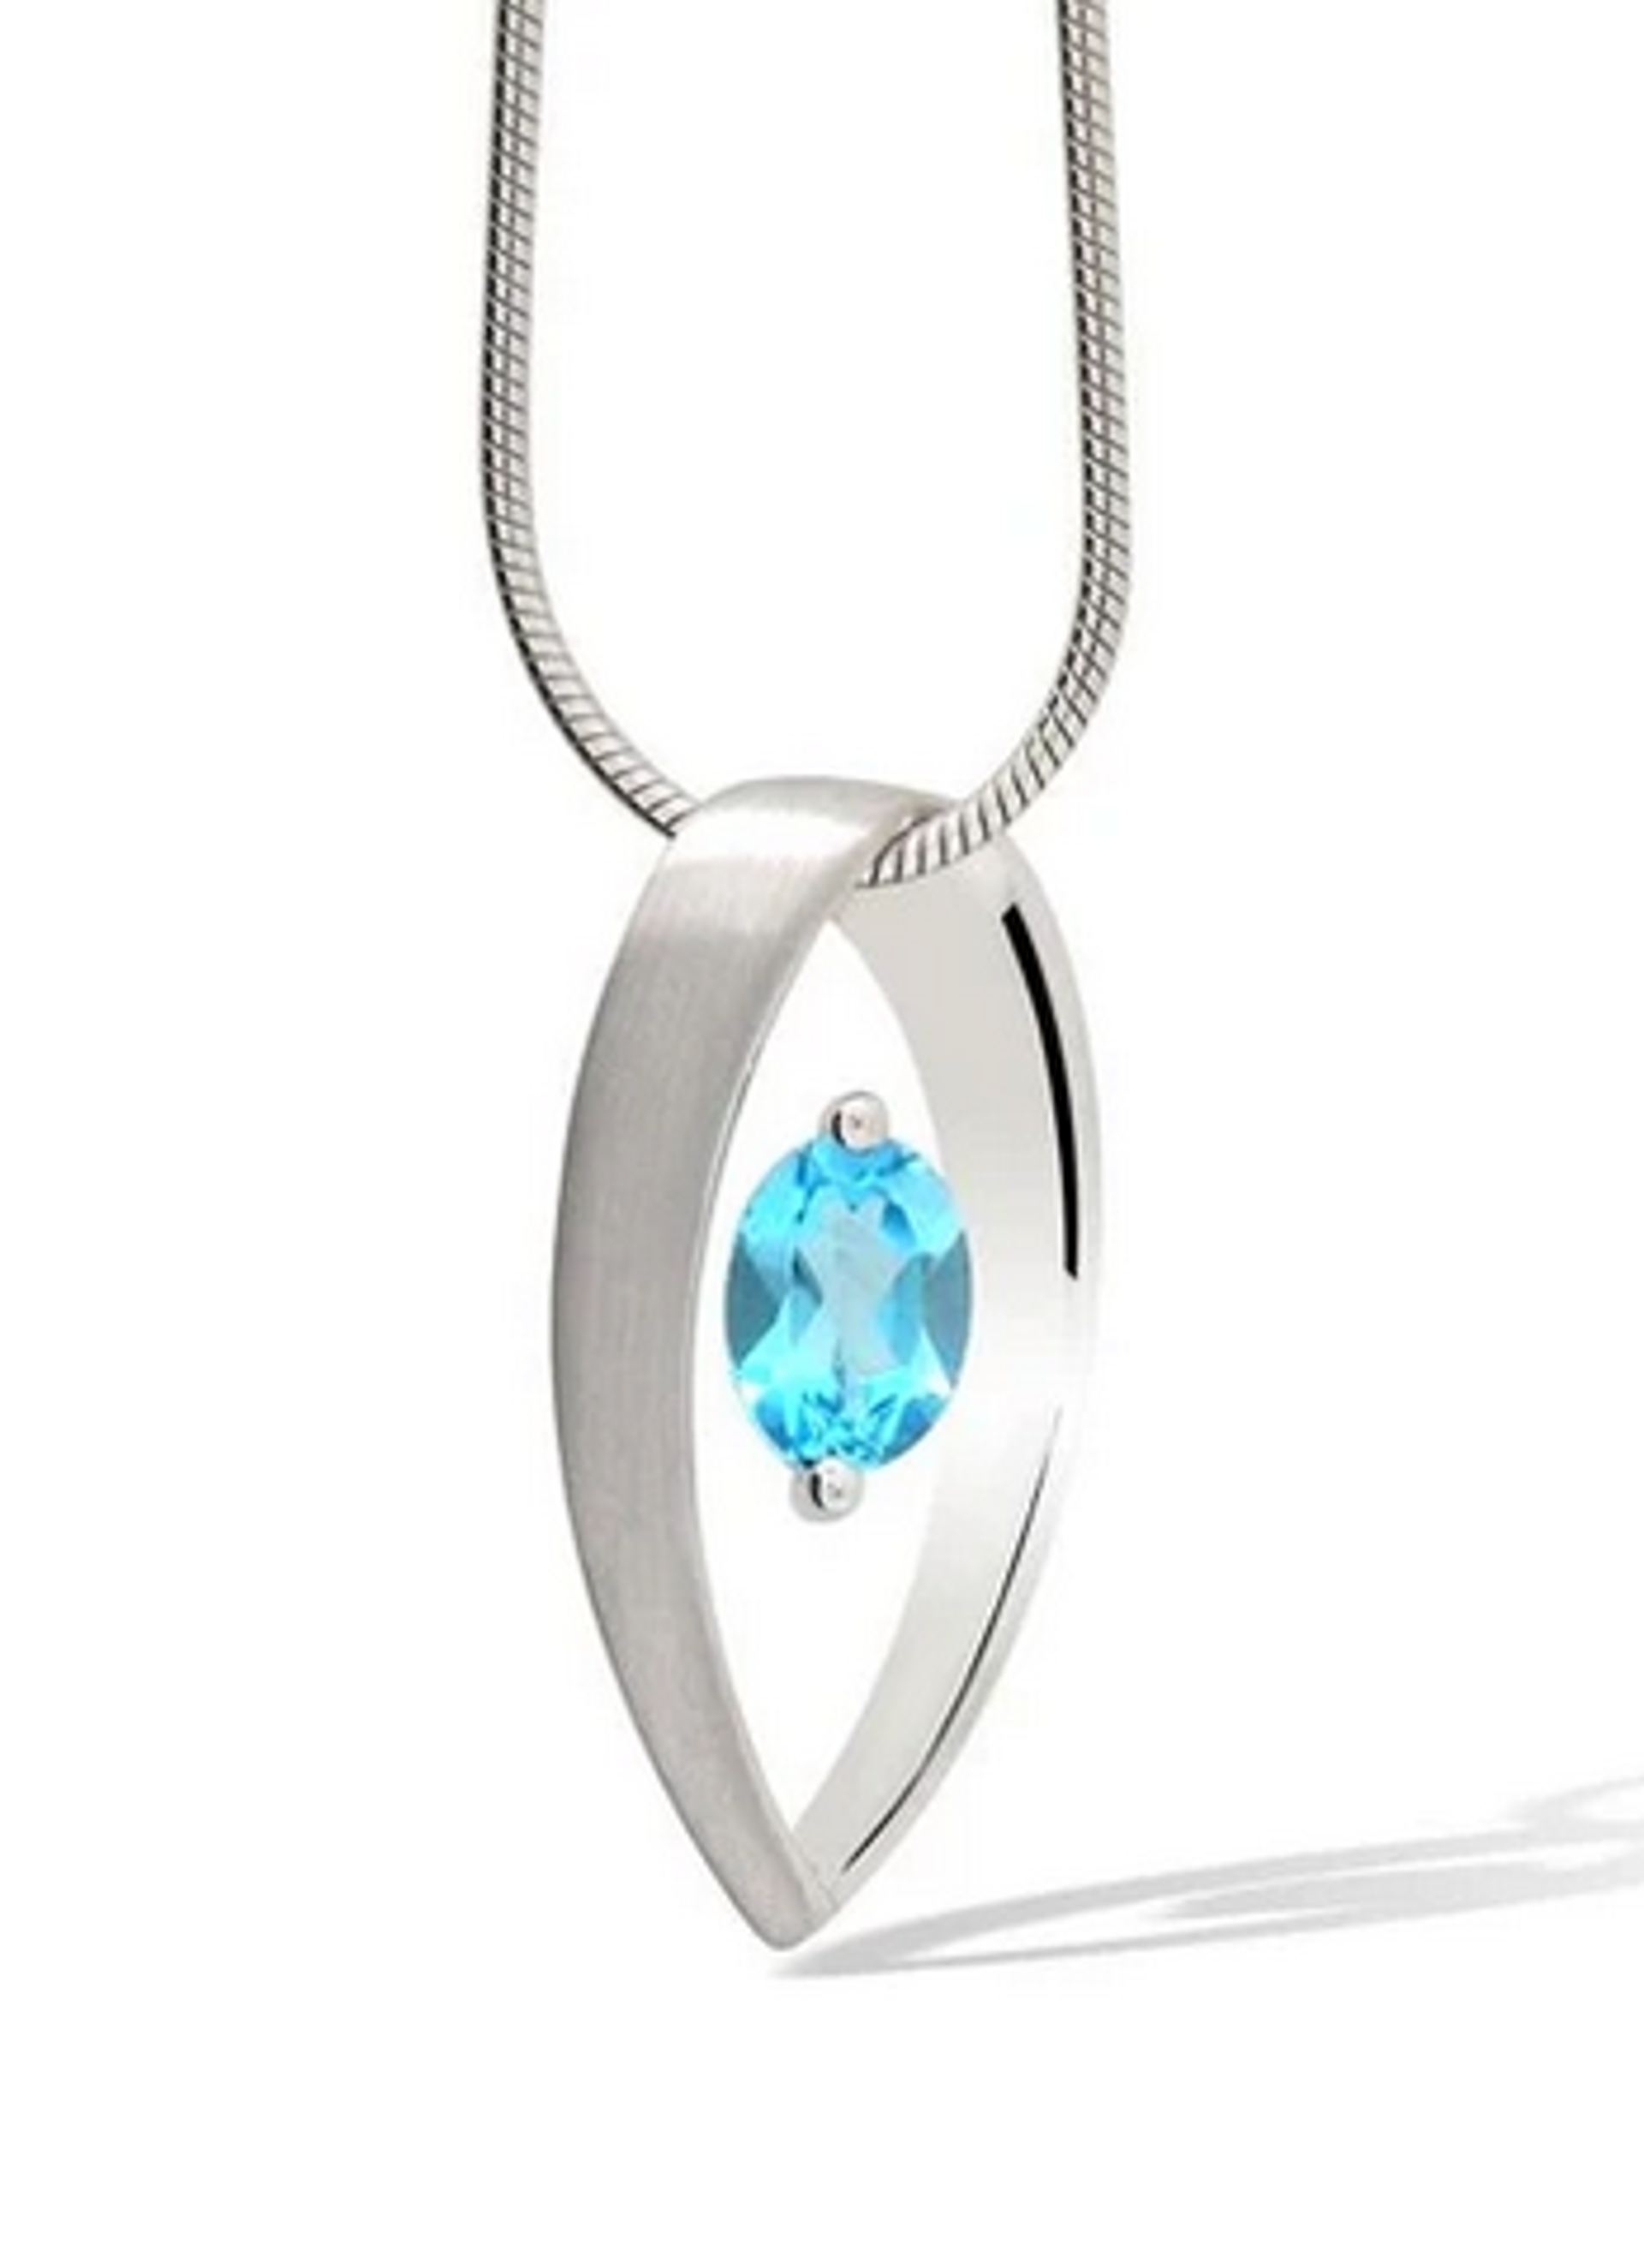 Pendant - Blue Topaz Droplet With Polished Sterling Silver  P7320BT by Joryel Vera